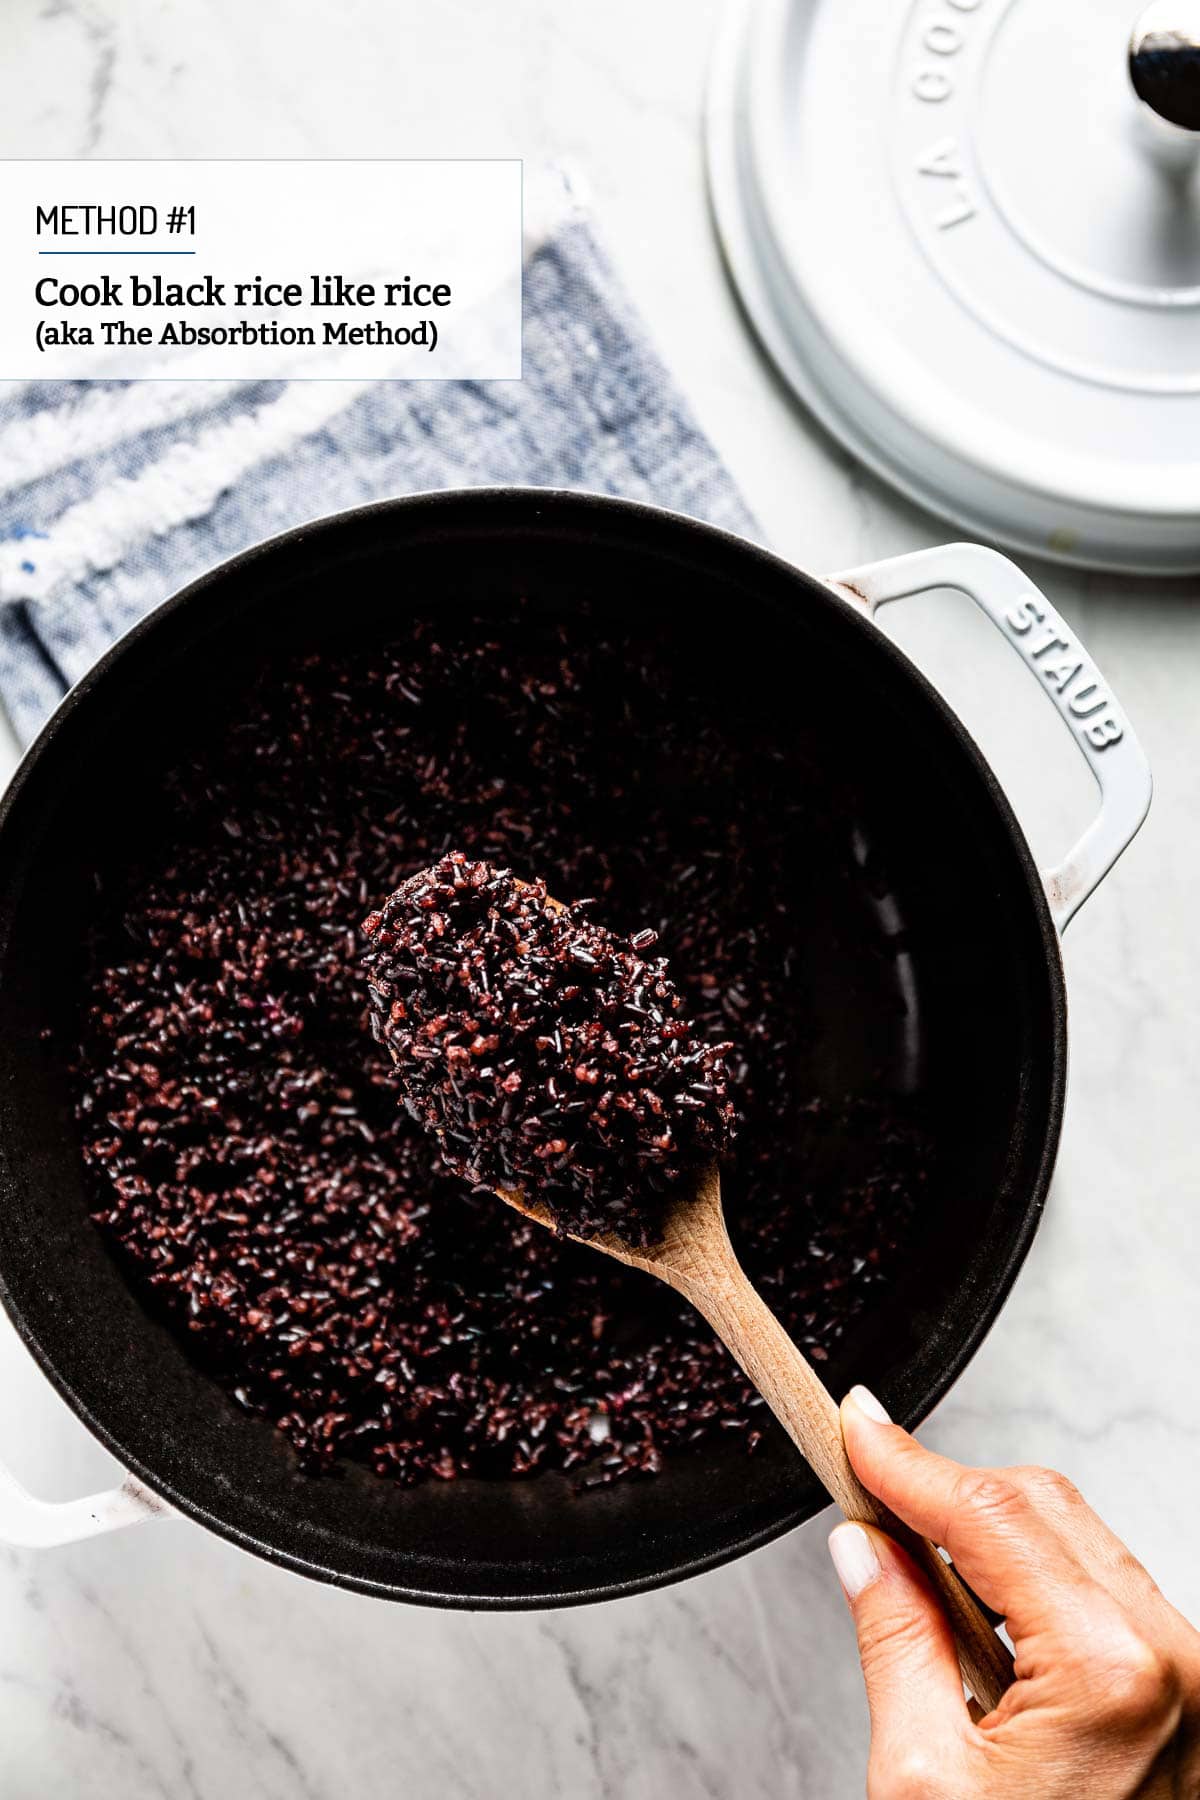 Person showing cooked black rice using the absorption method